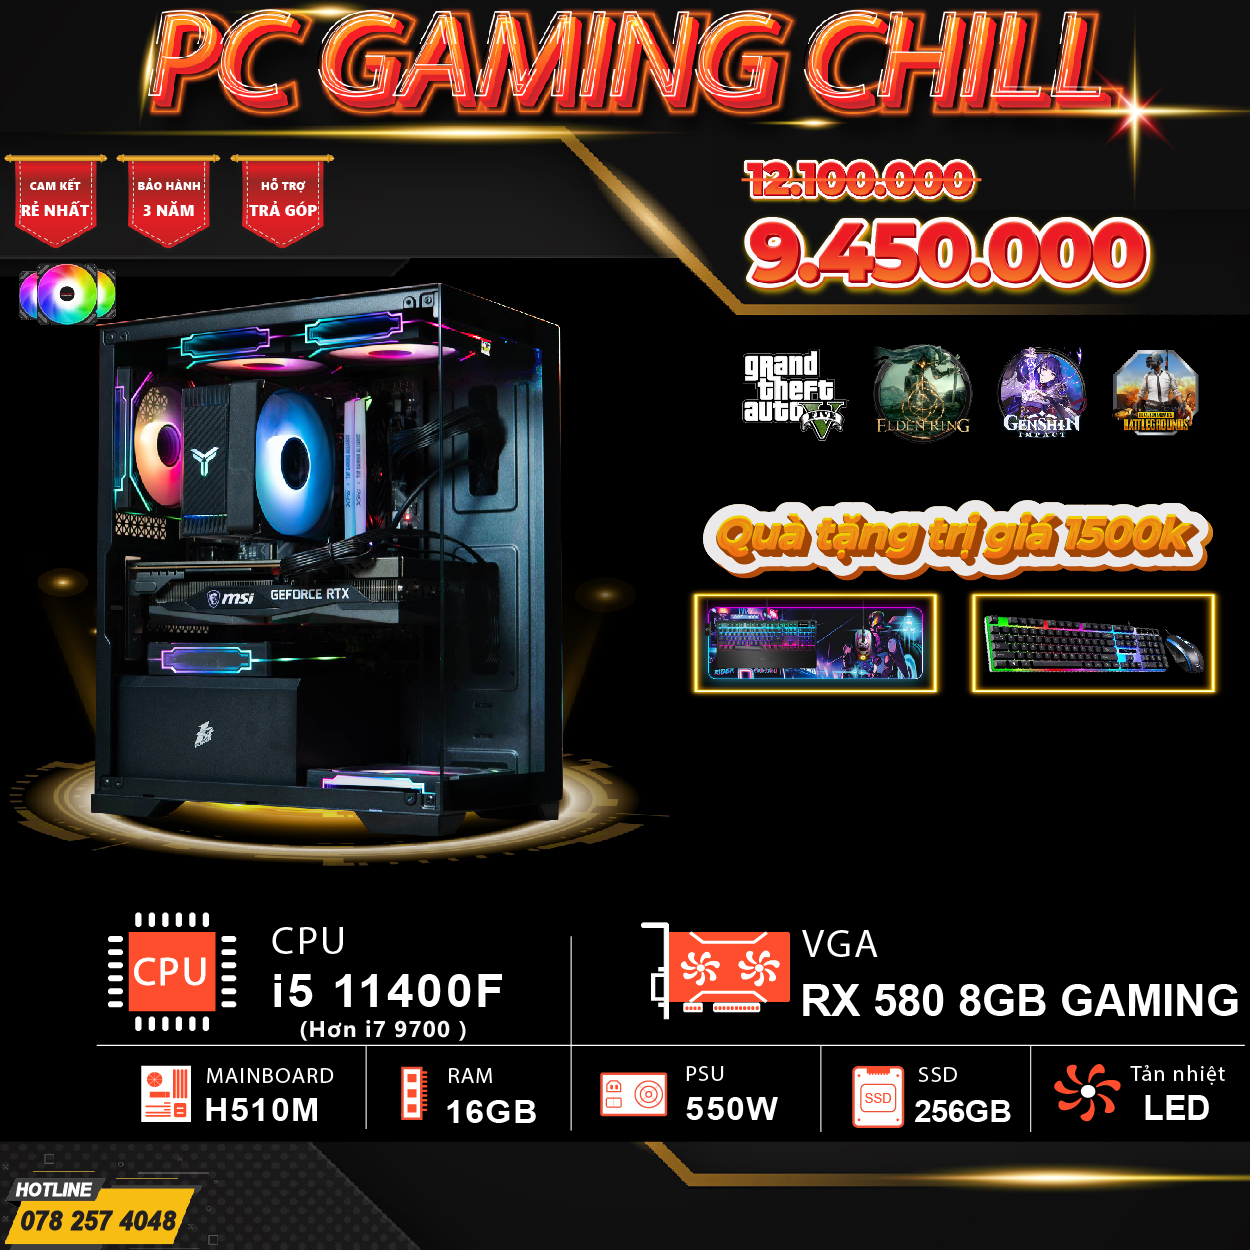 PC GAMING CHILL